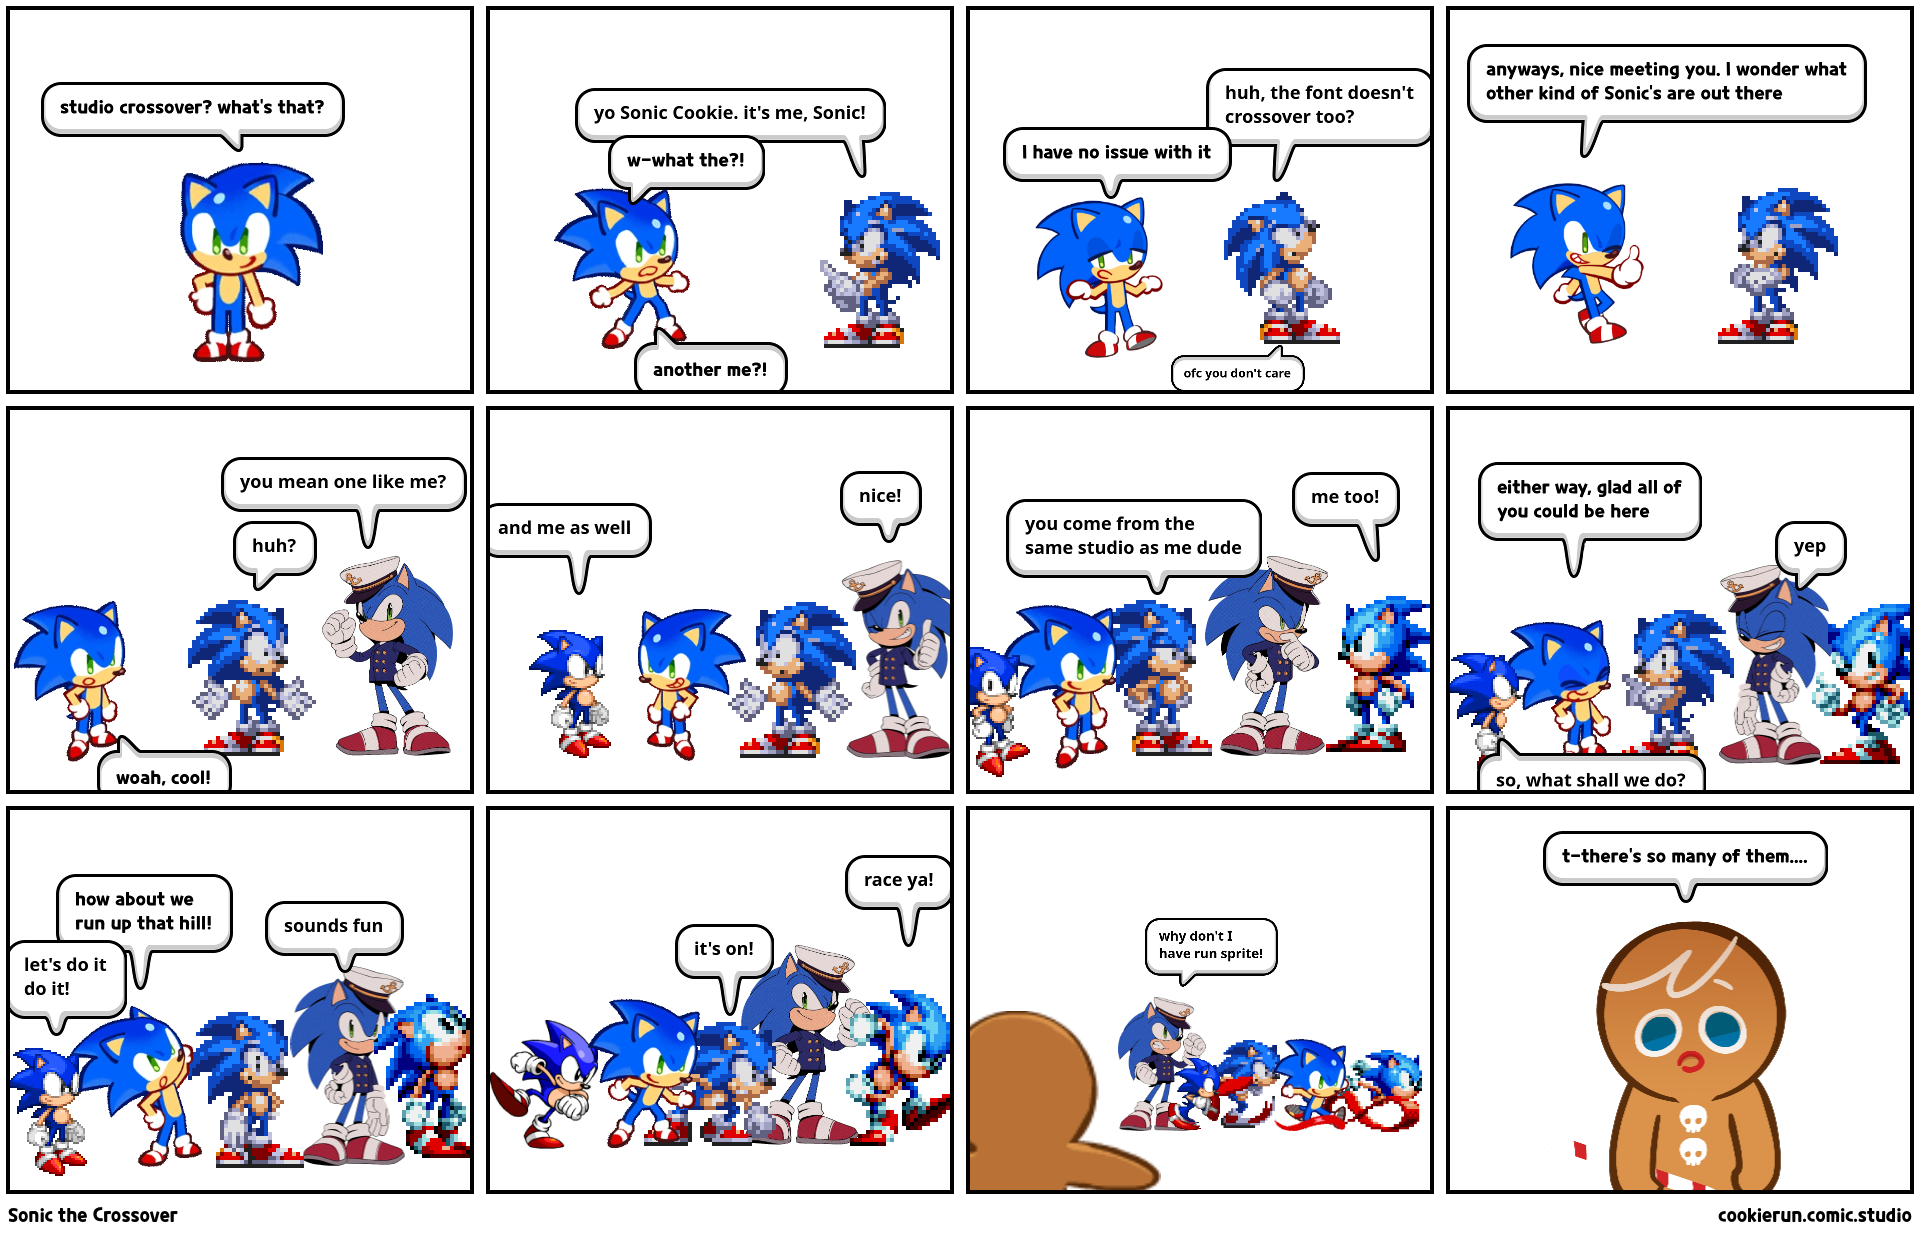 Sonic the Crossover